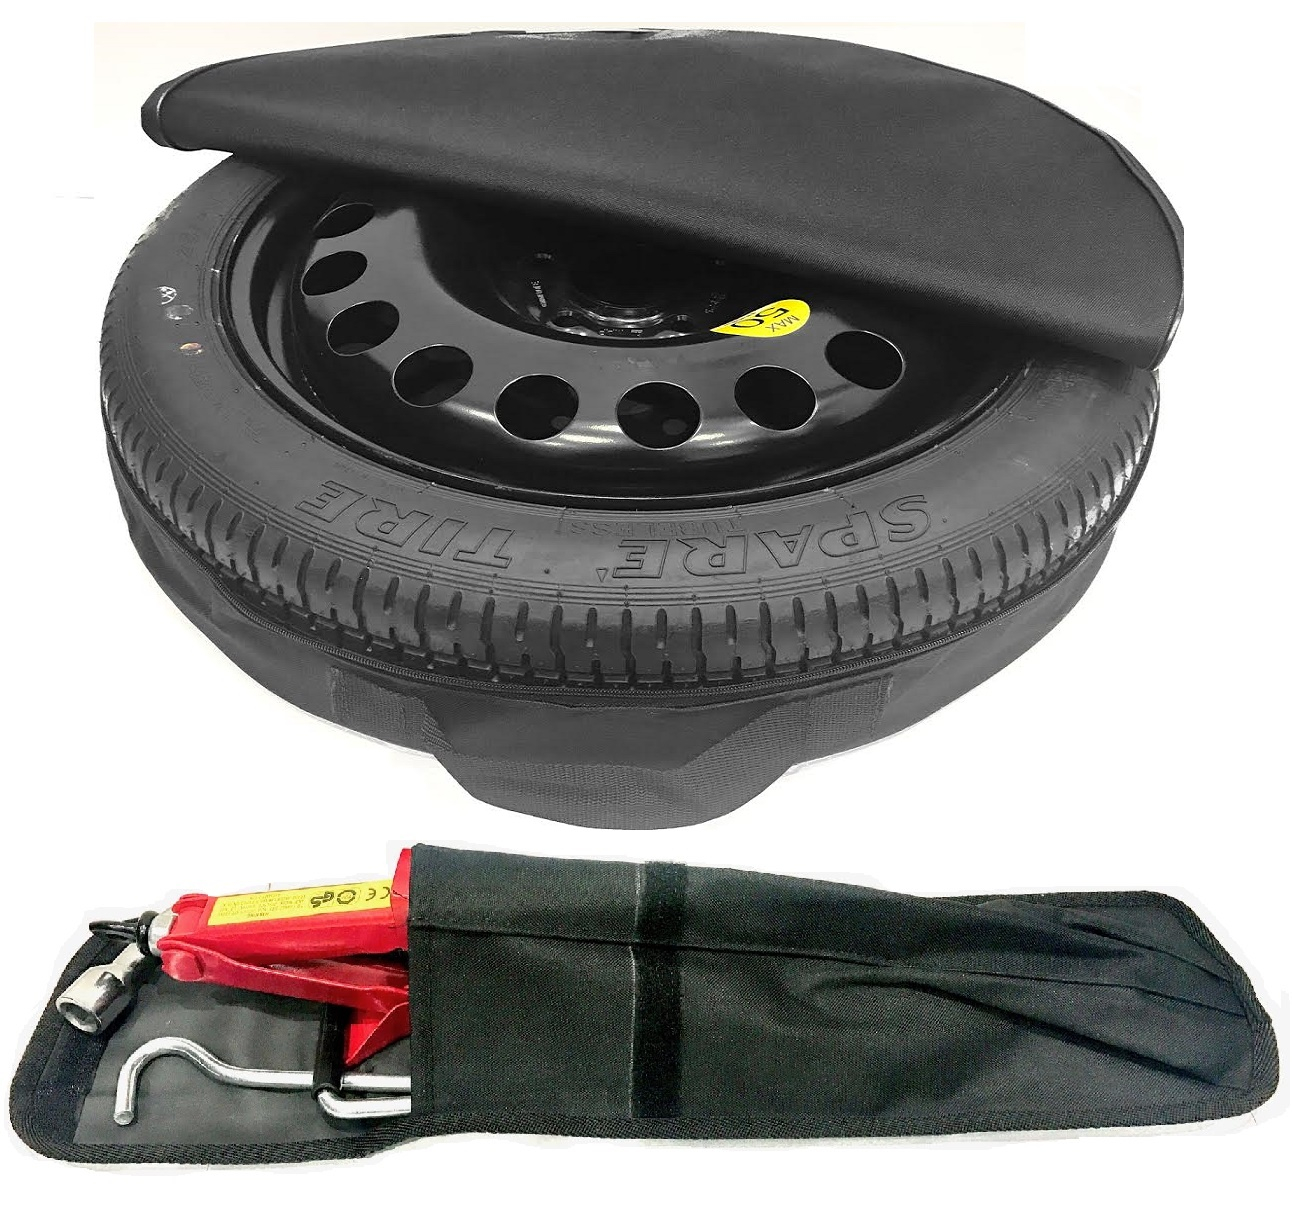 MERCEDES E CLASS 2008-PRESENT DAY 17" SPACE SAVER SPARE WHEEL AND COVER BAG